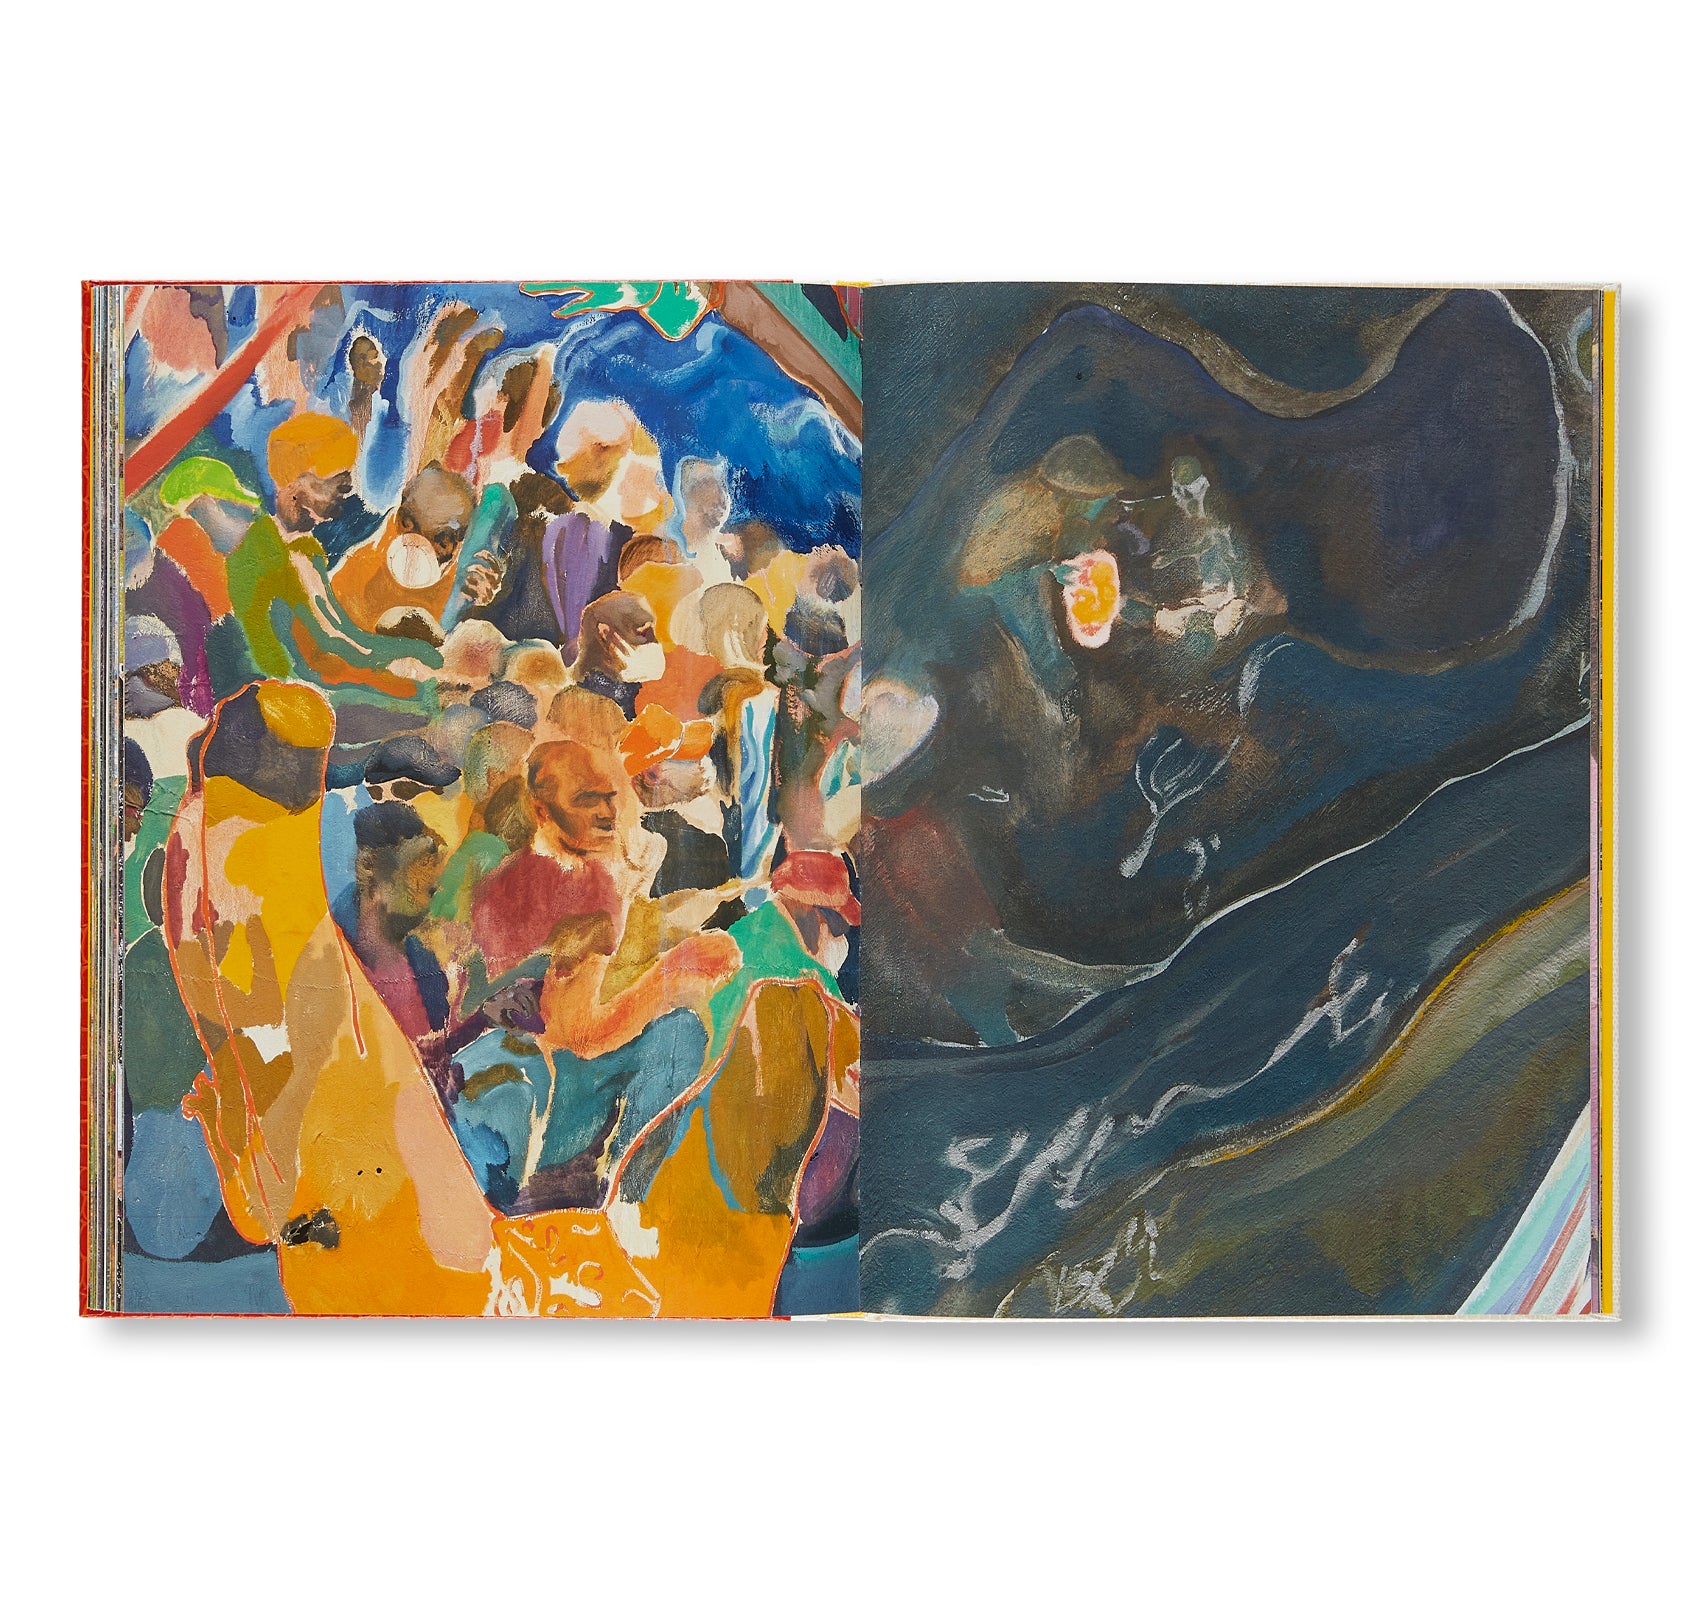 YOU, WHO ARE STILL ALIVE by Michael Armitage